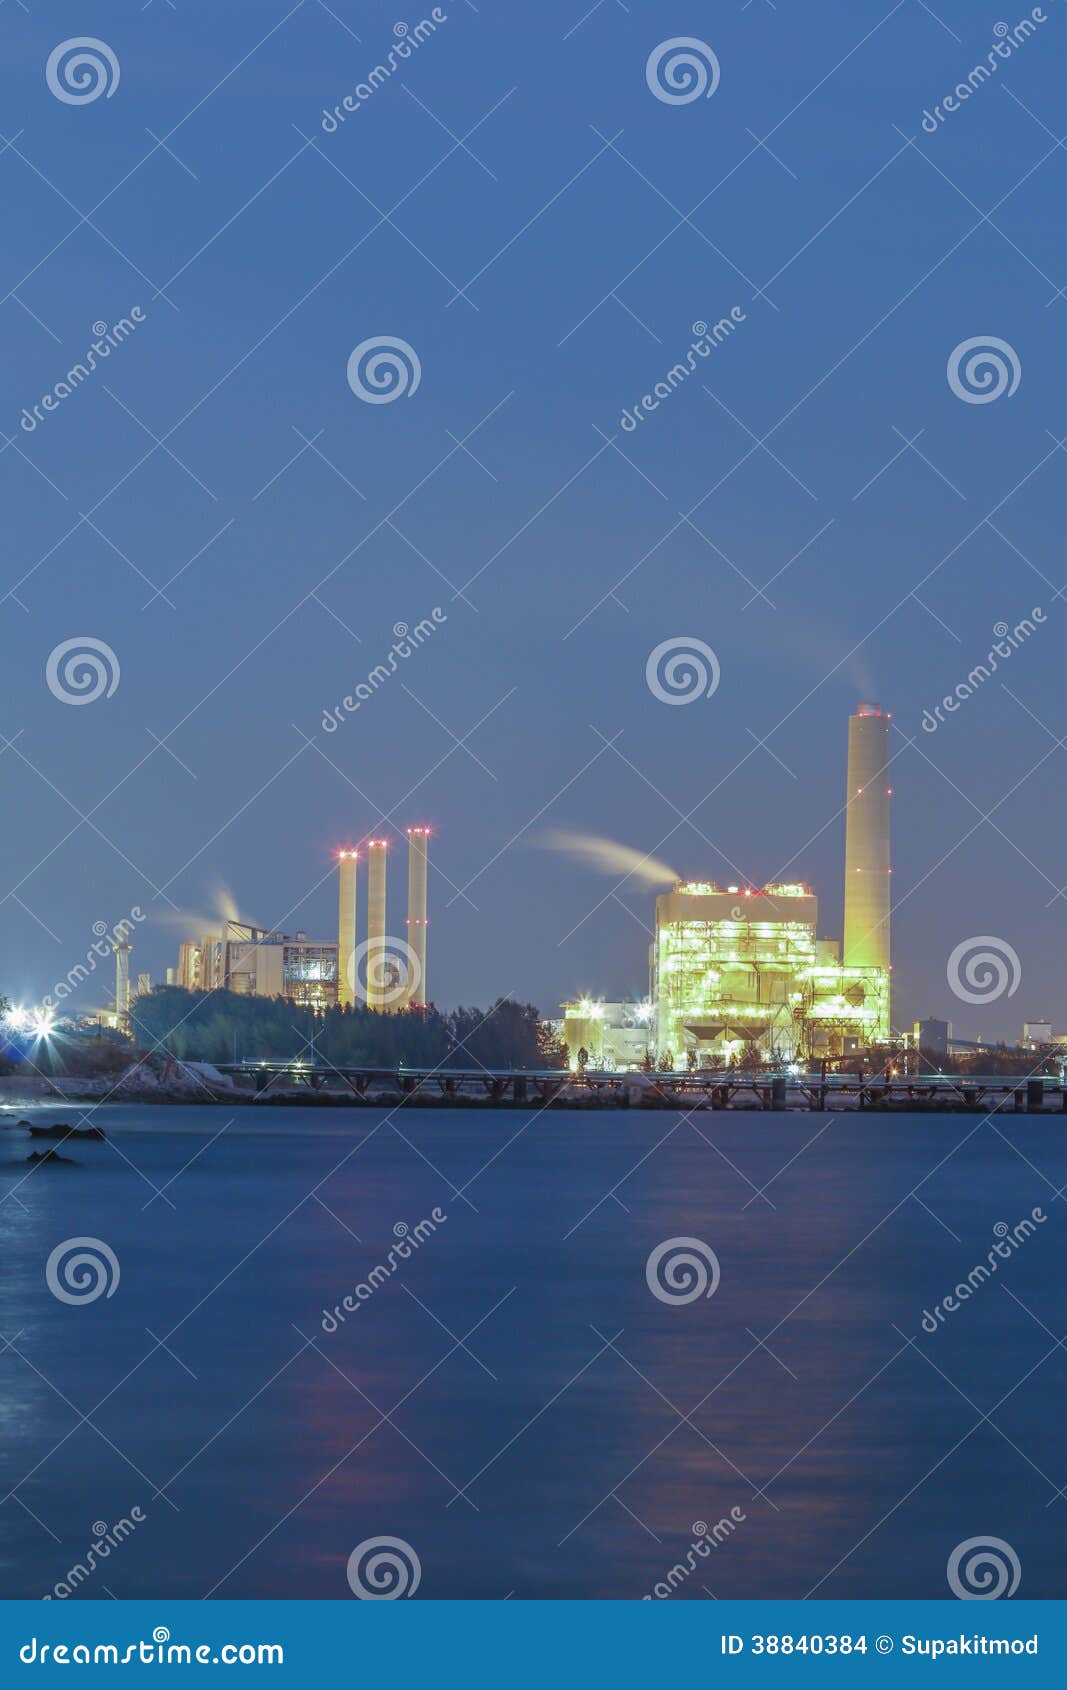 Night scene of Power plant with bay. Power plant with bay on night time